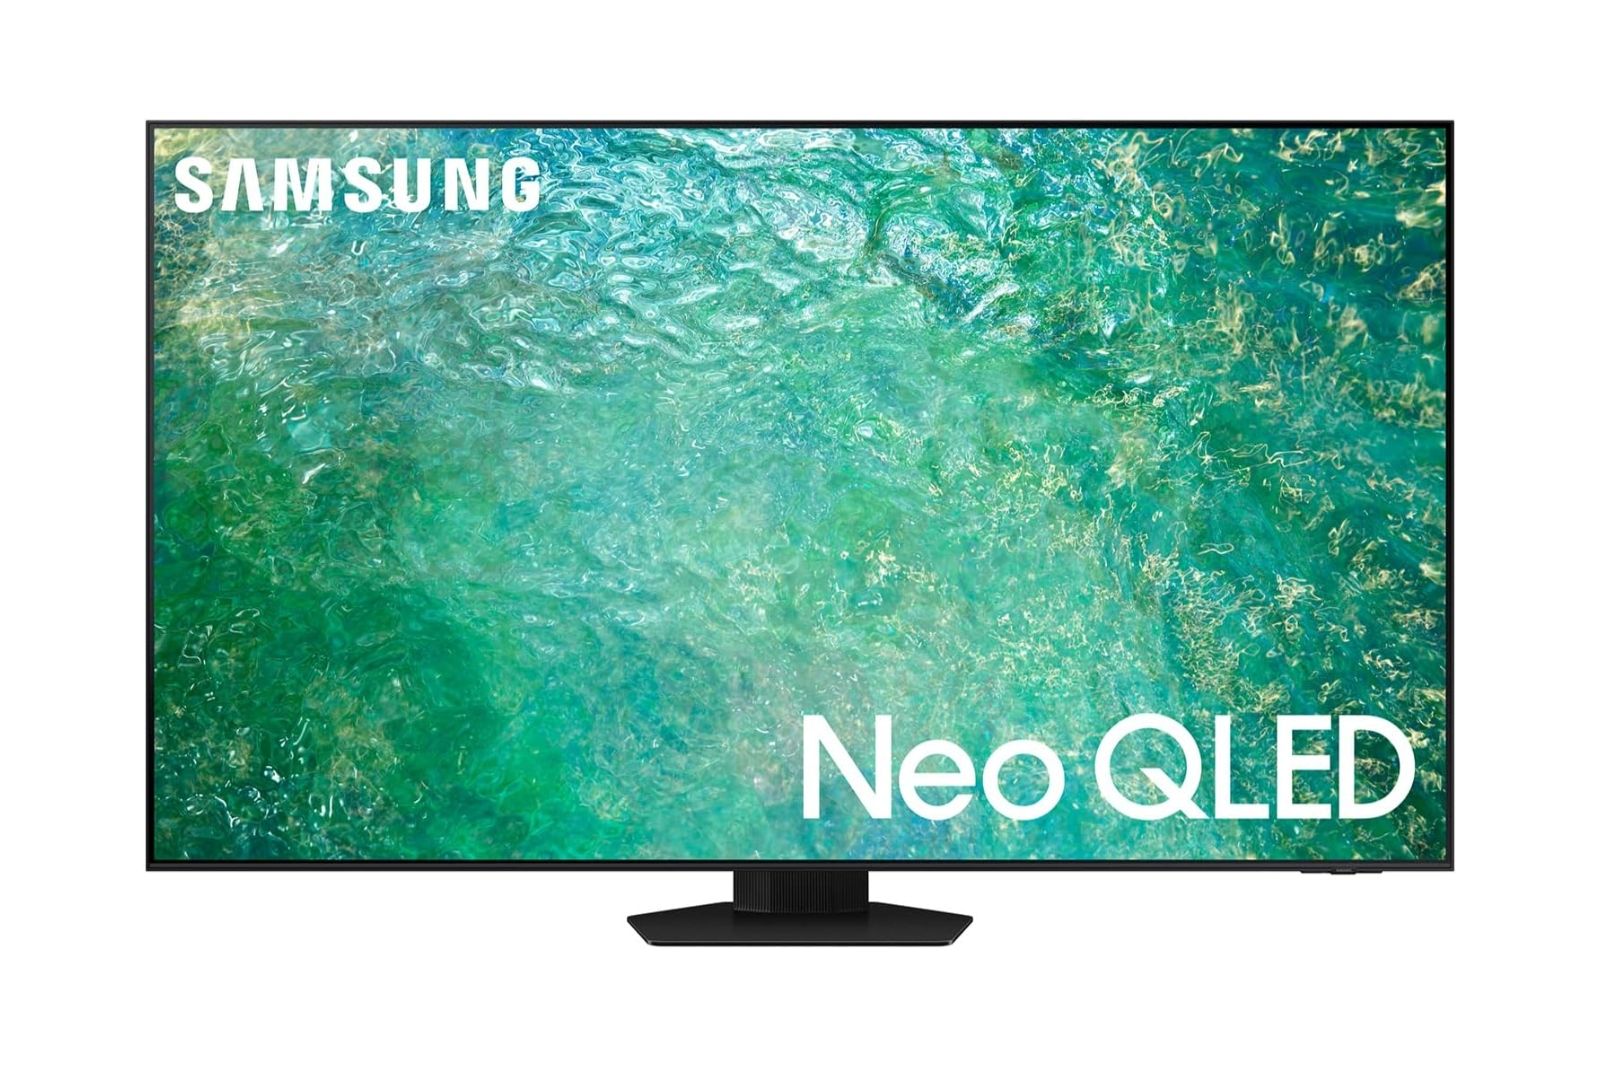 Samsung Q60B QLED TV Review: Quantum dots for less - Reviewed